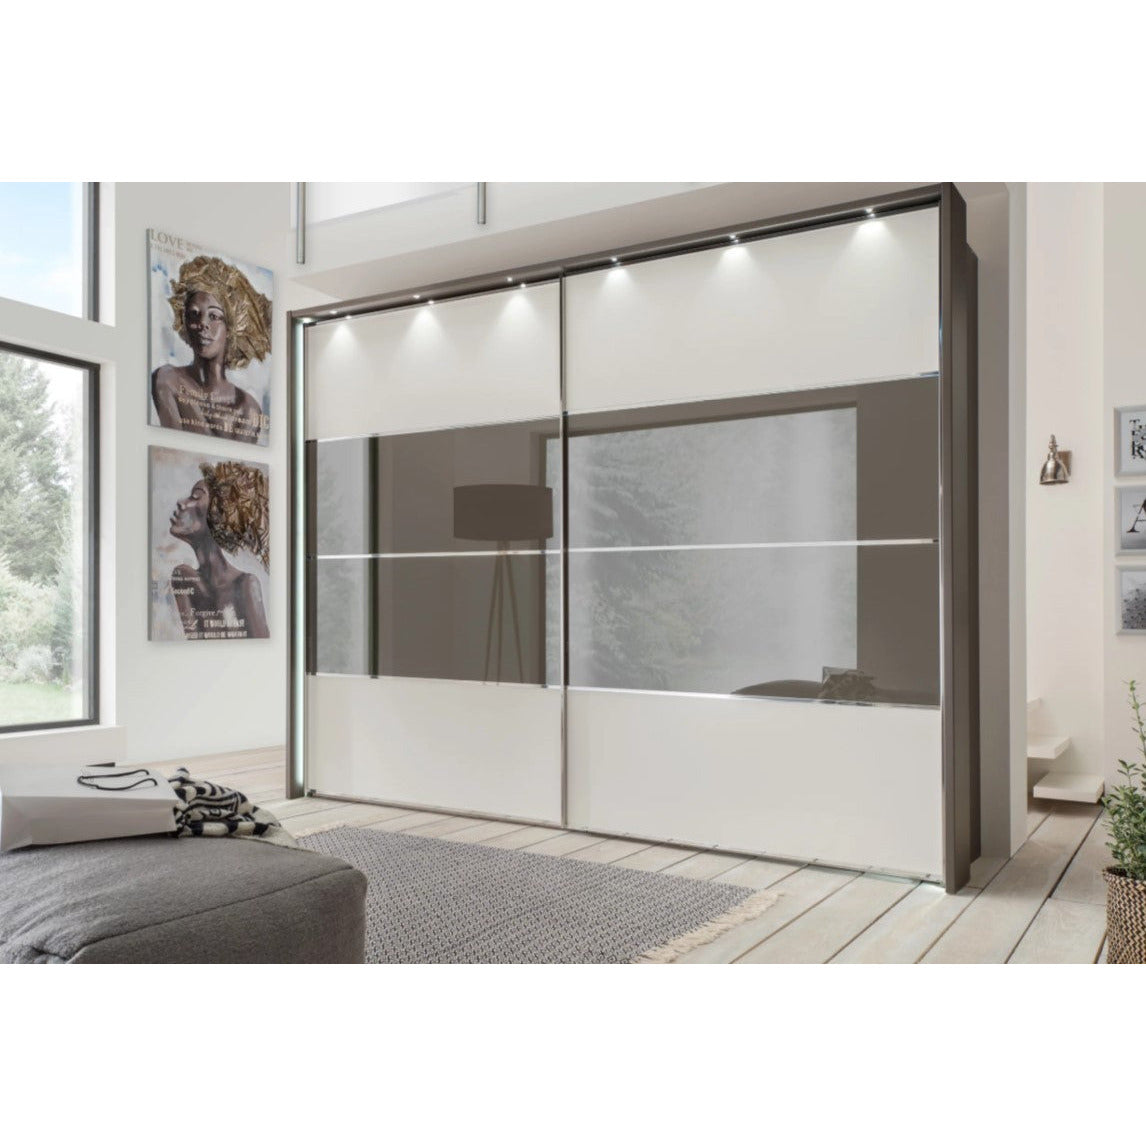 Wiemann Limara Sliding Wardrobe in Pebble Grey and Line 2 and 3 in Pebble Grey Glass